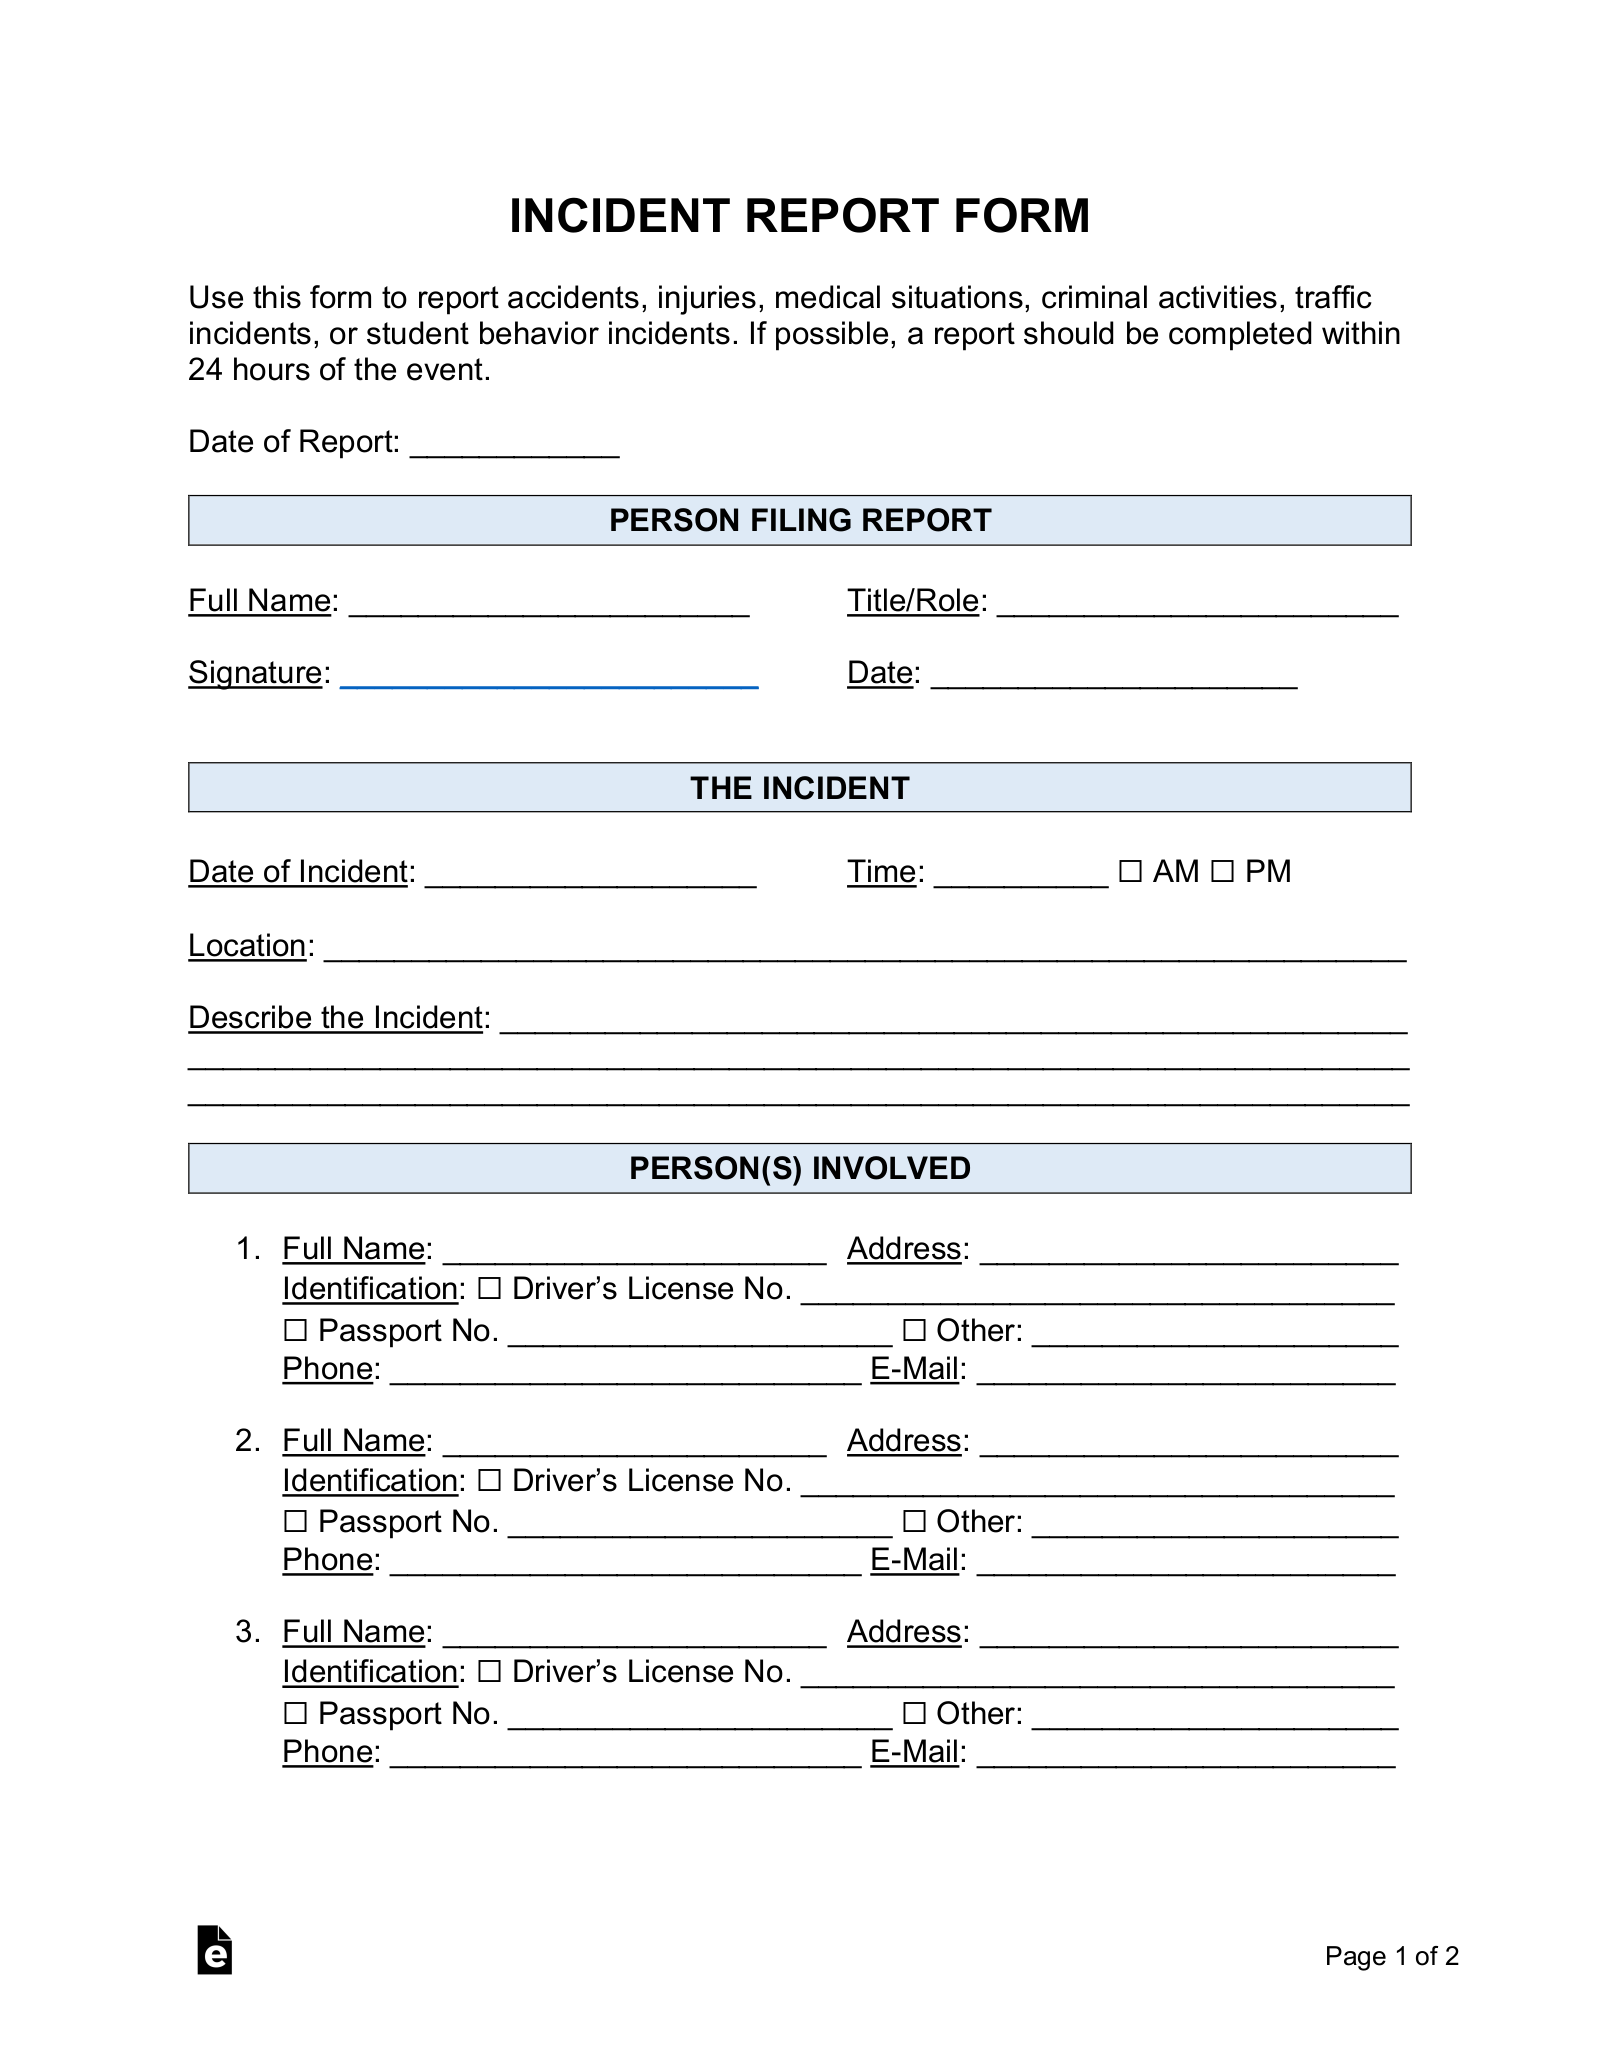 Free Incident Report Templates (18) | Sample - Pdf | Word – Eforms for Free Printable Incident Report Form